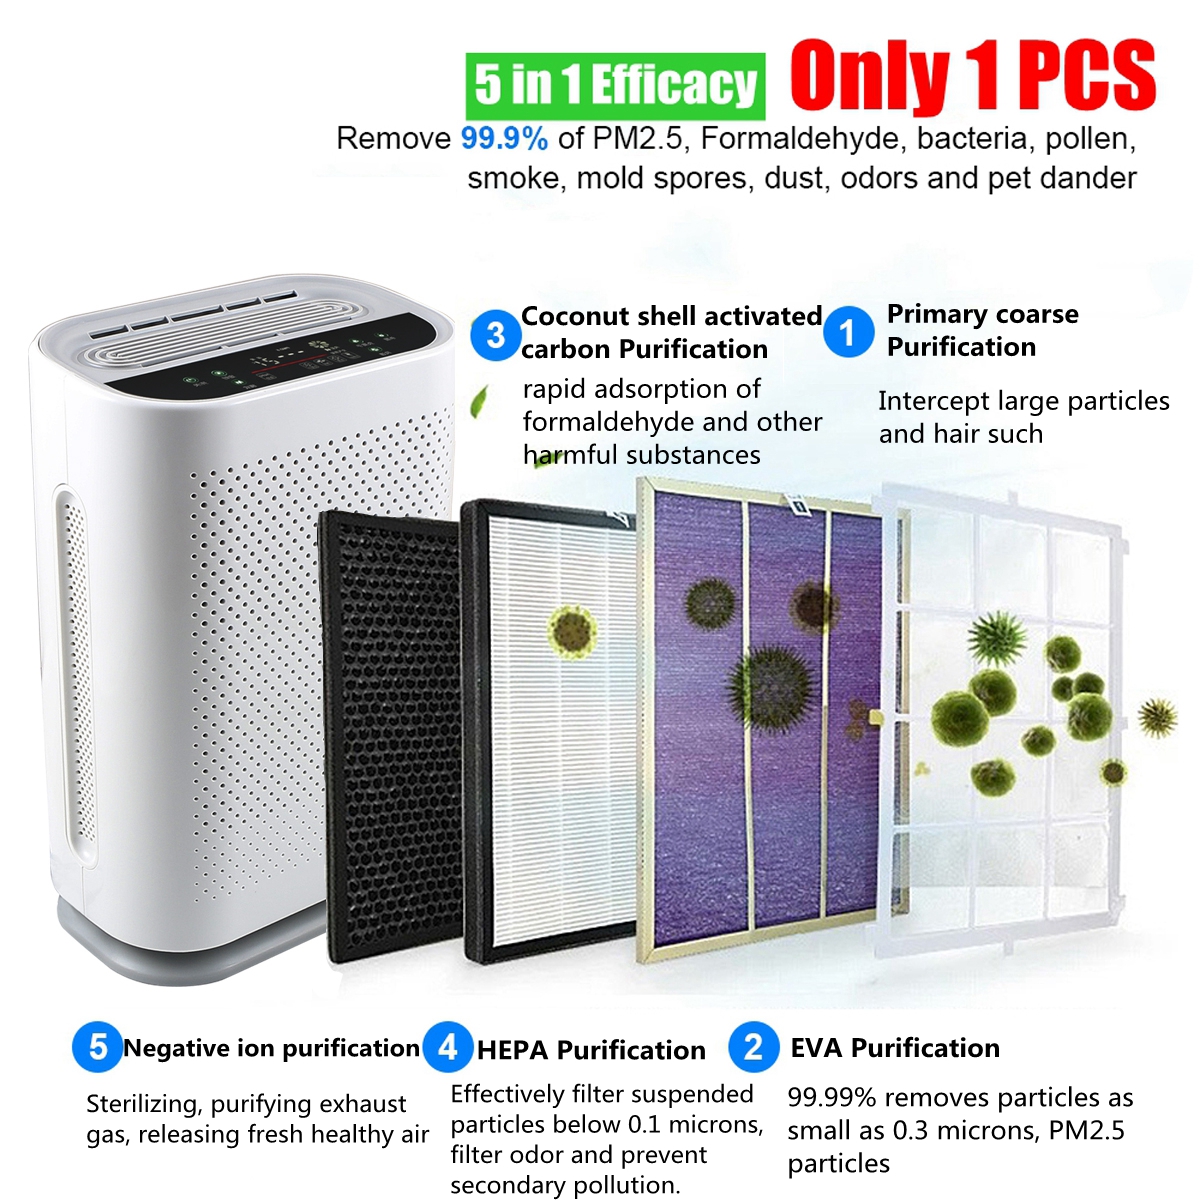 AUGIENB-Smart-Sensor-Air-Purifier-for-Home-Large-Room-With-True-HEPA-Filter-To-Remove-Smoke-Dust-Mol-1710011-5